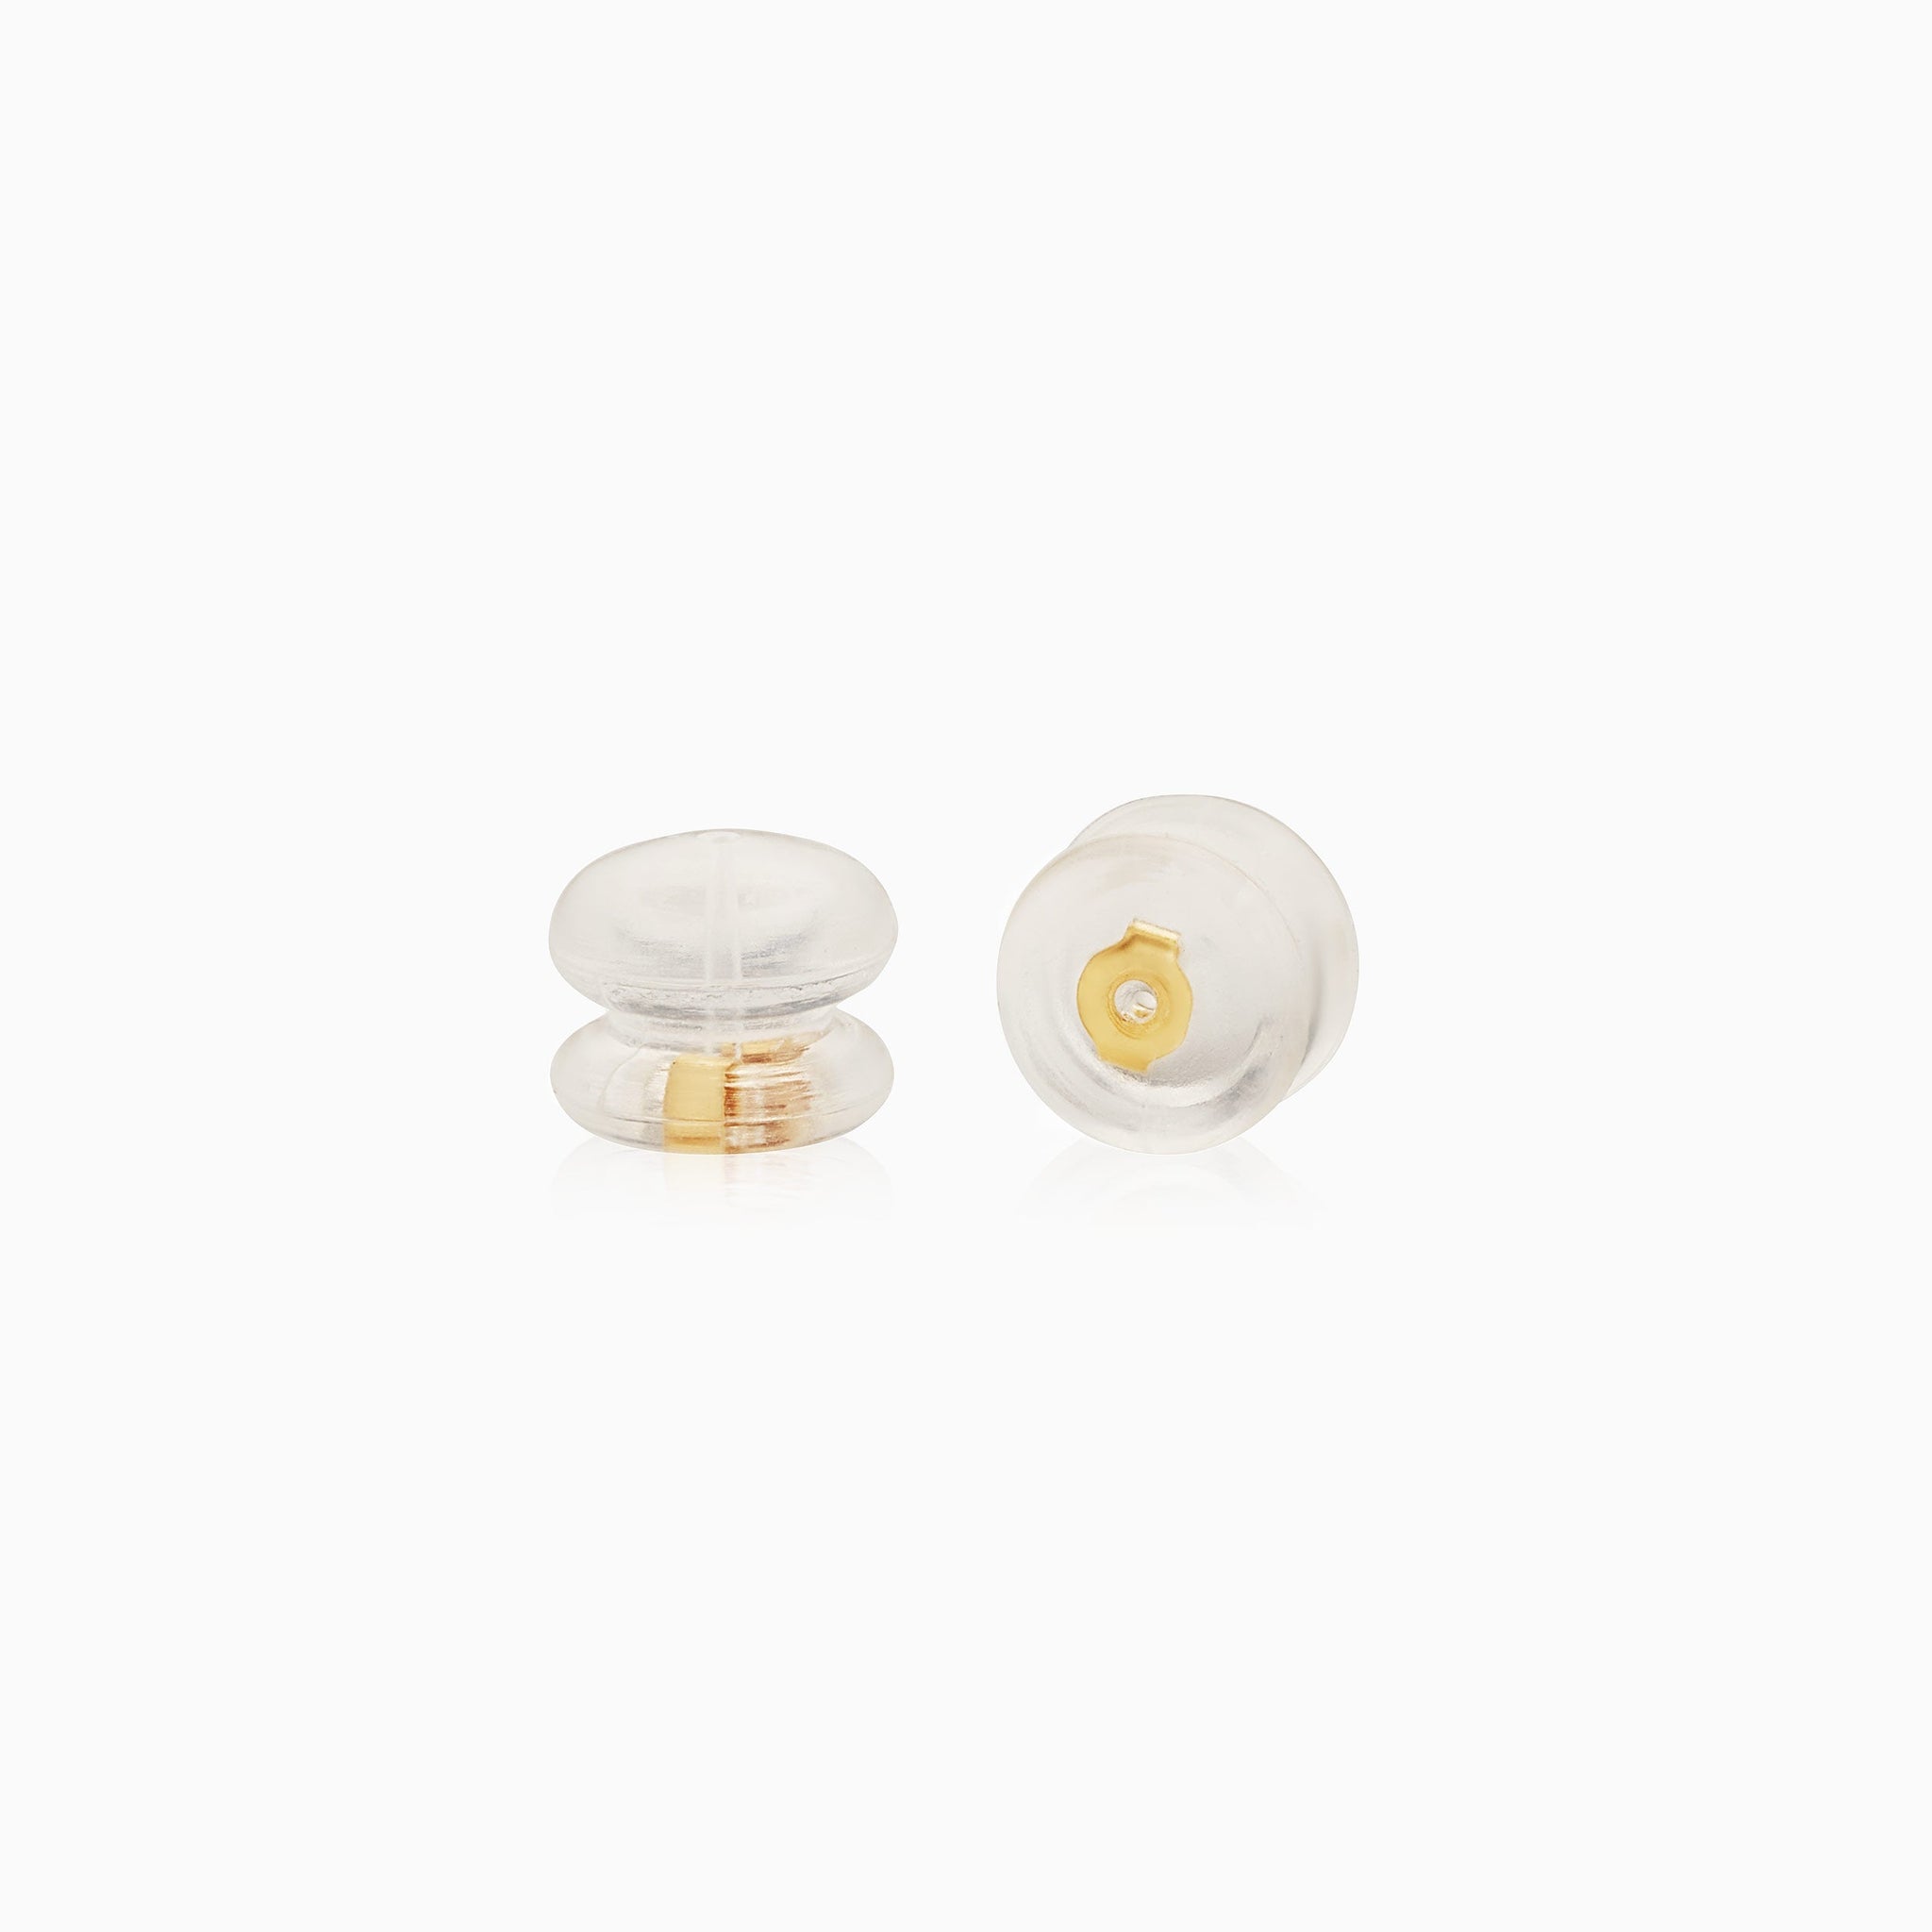 Silicon Back Earring Stoppers  Earrings Components Stoppers